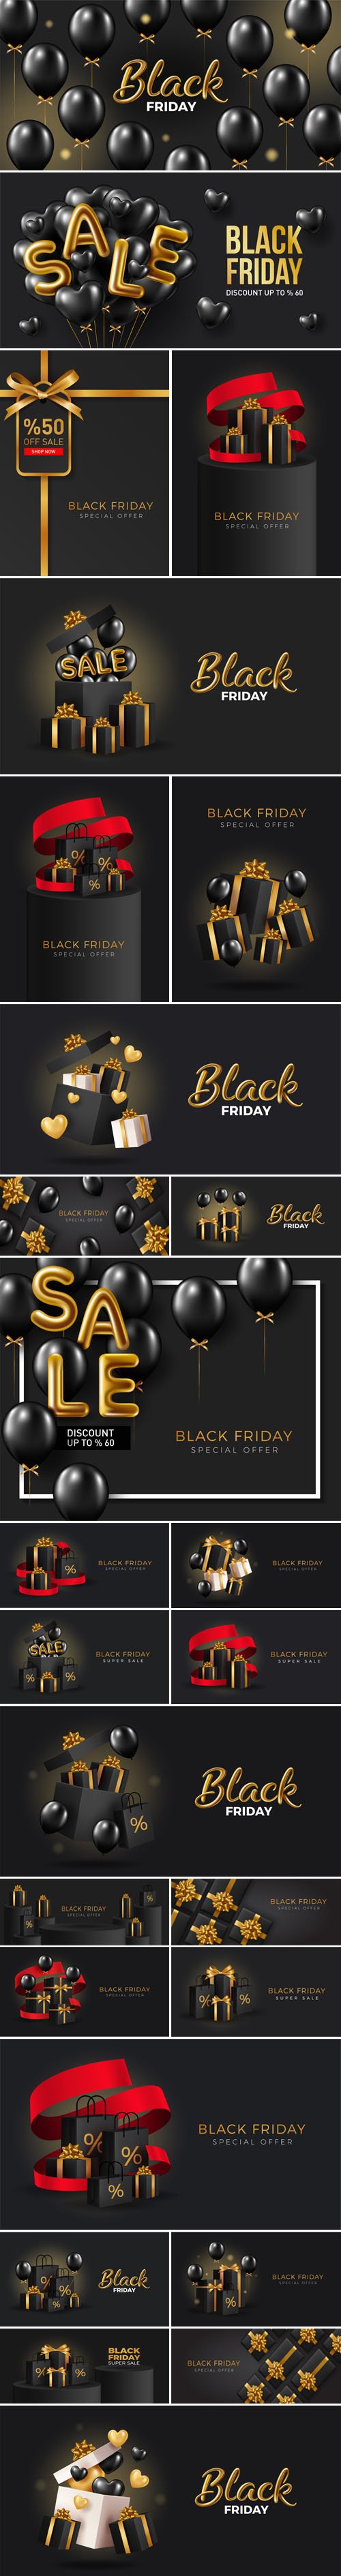 Black Friday - Vector Banners & Backgrounds Templates